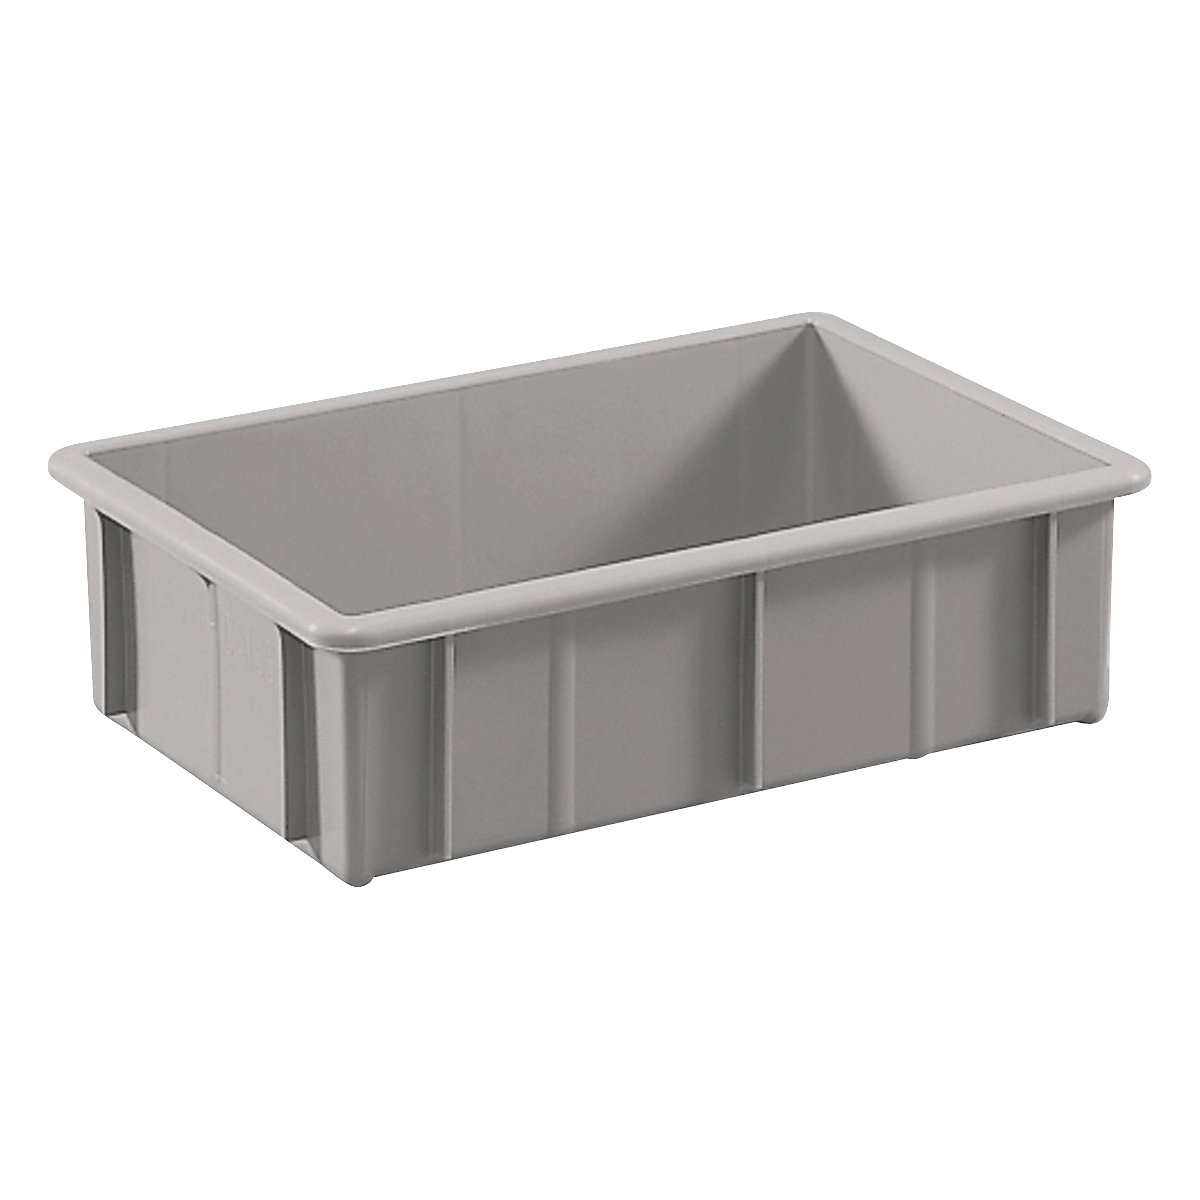 Stacking container made of polyethylene, with reinforcement ribs – mauser